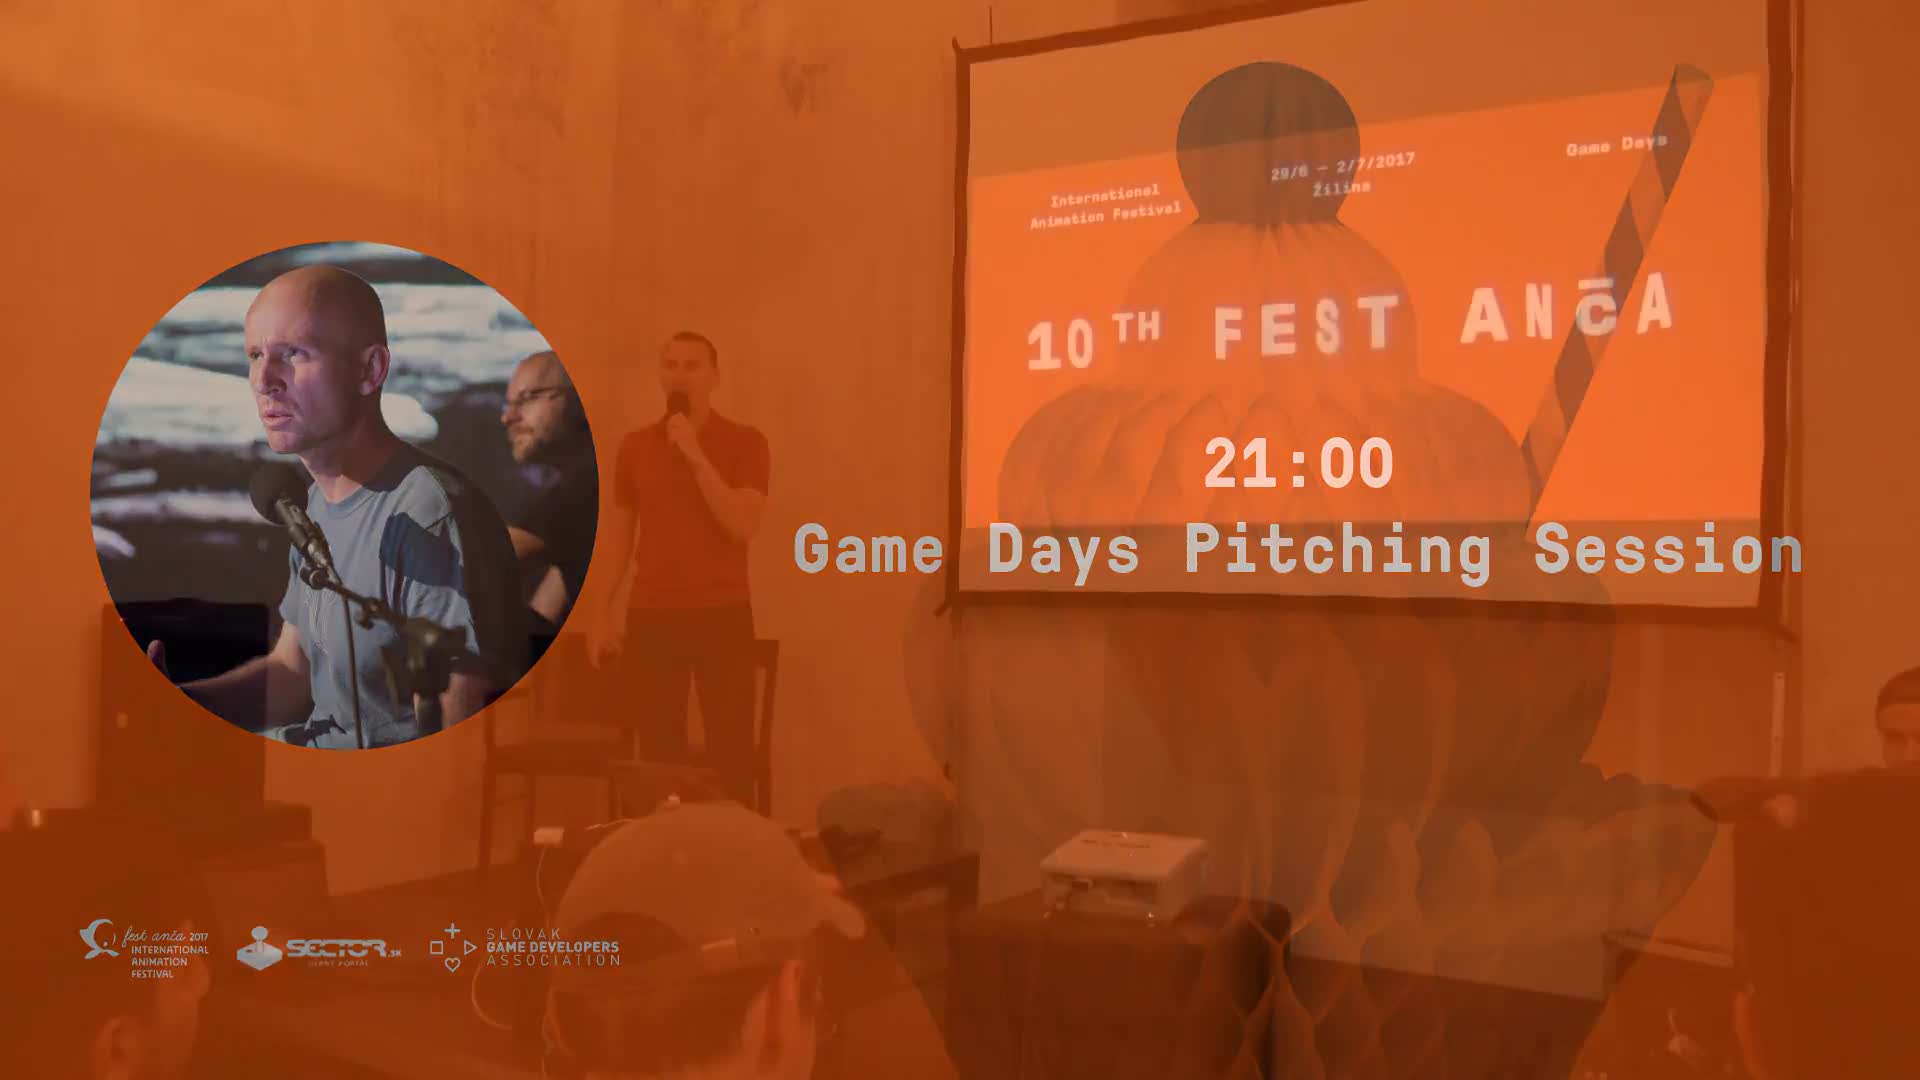 Game Days Pitching Session - Fest Ana 